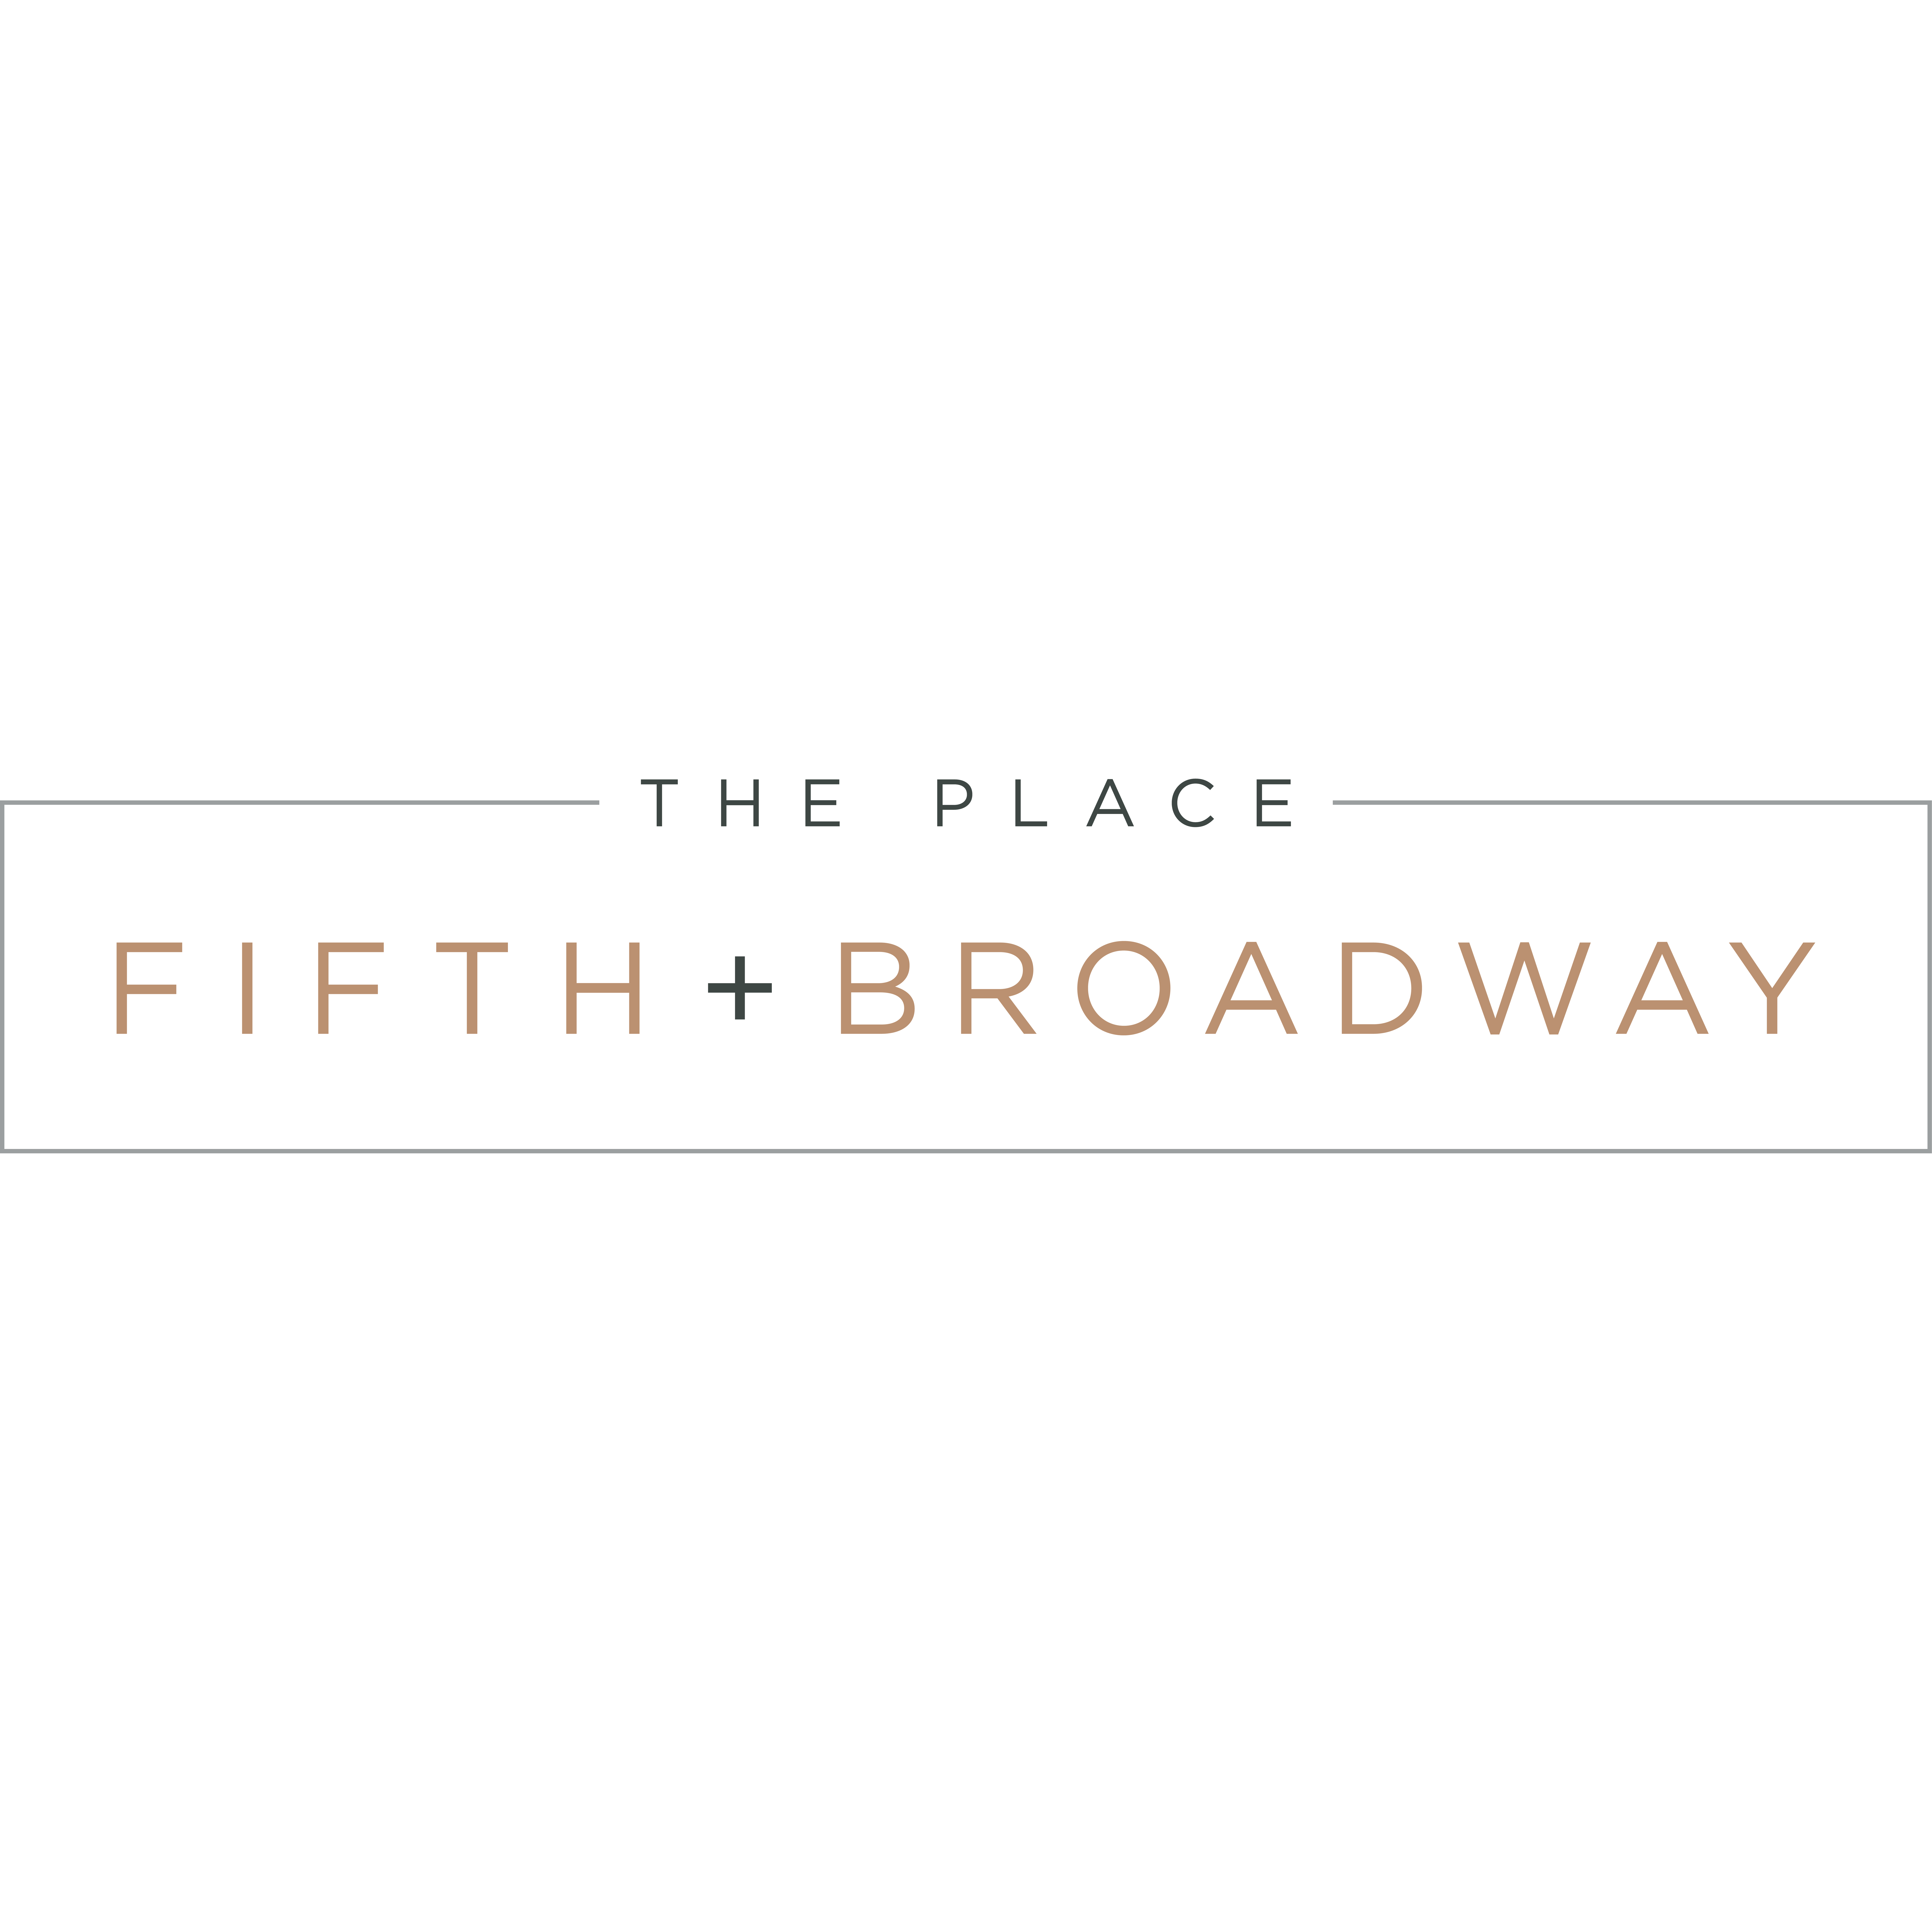 The Place at Fifth + Broadway